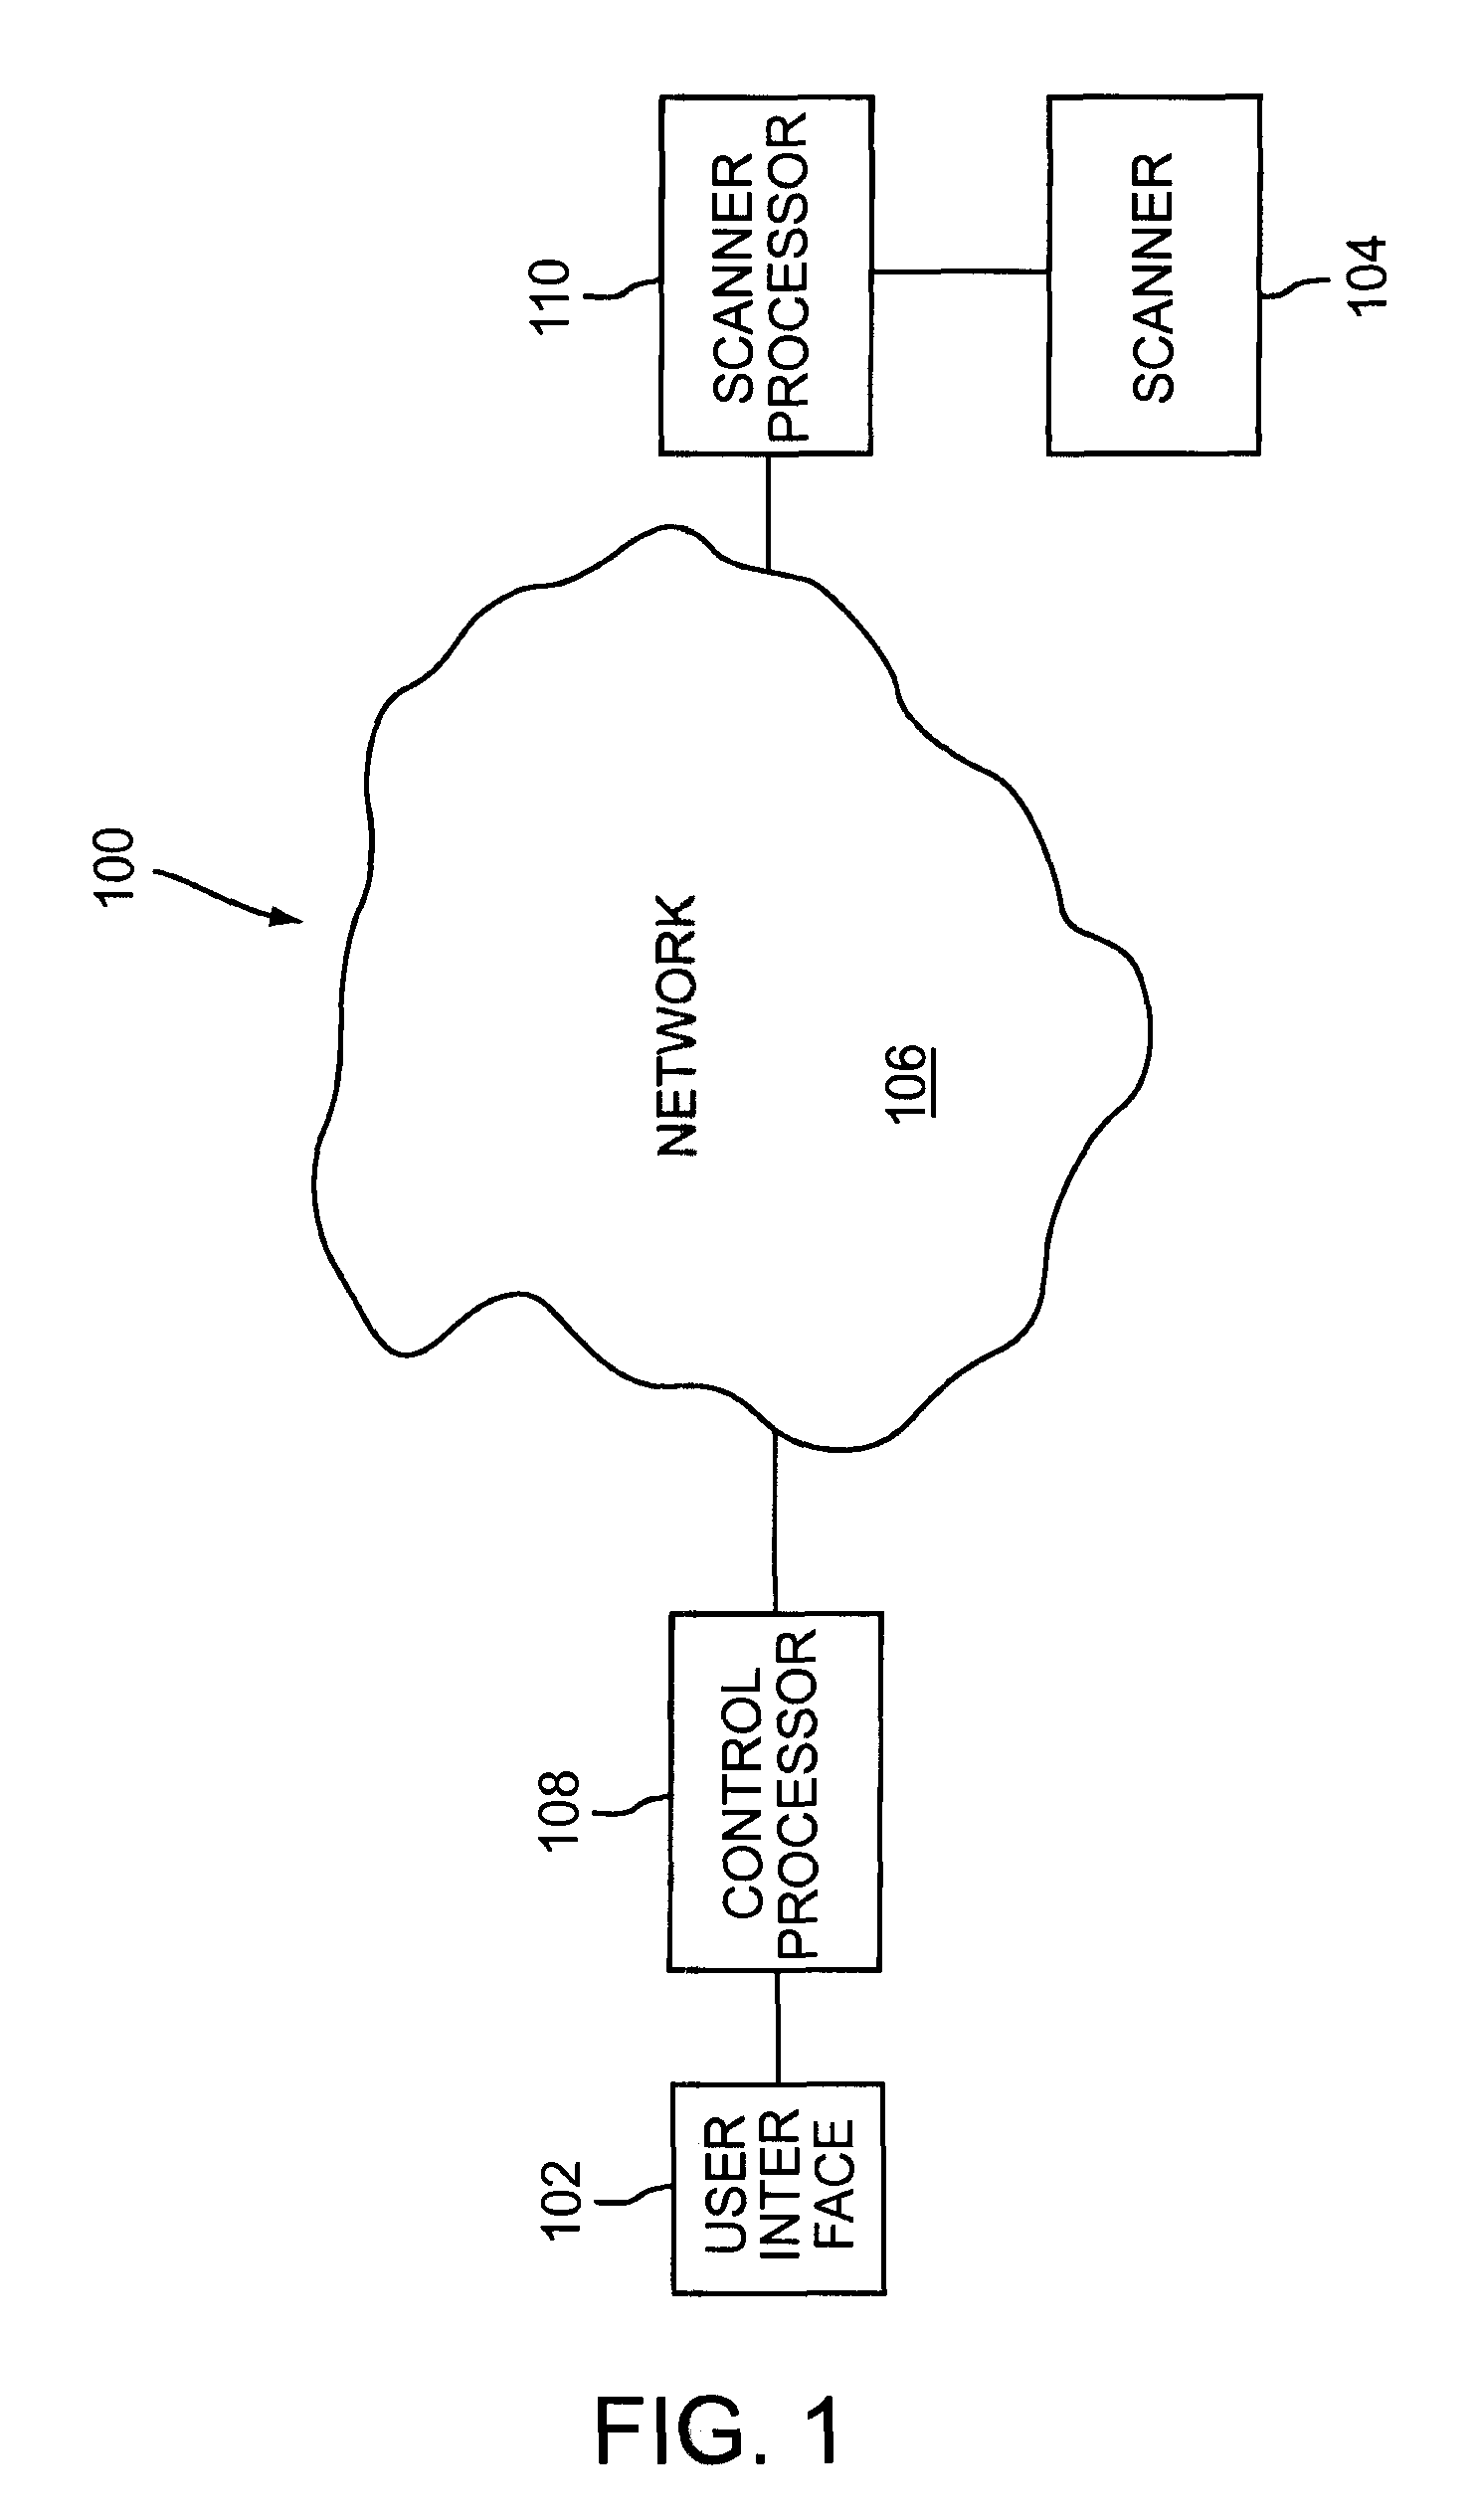 System and method for the operation of diagnostic medical equipment